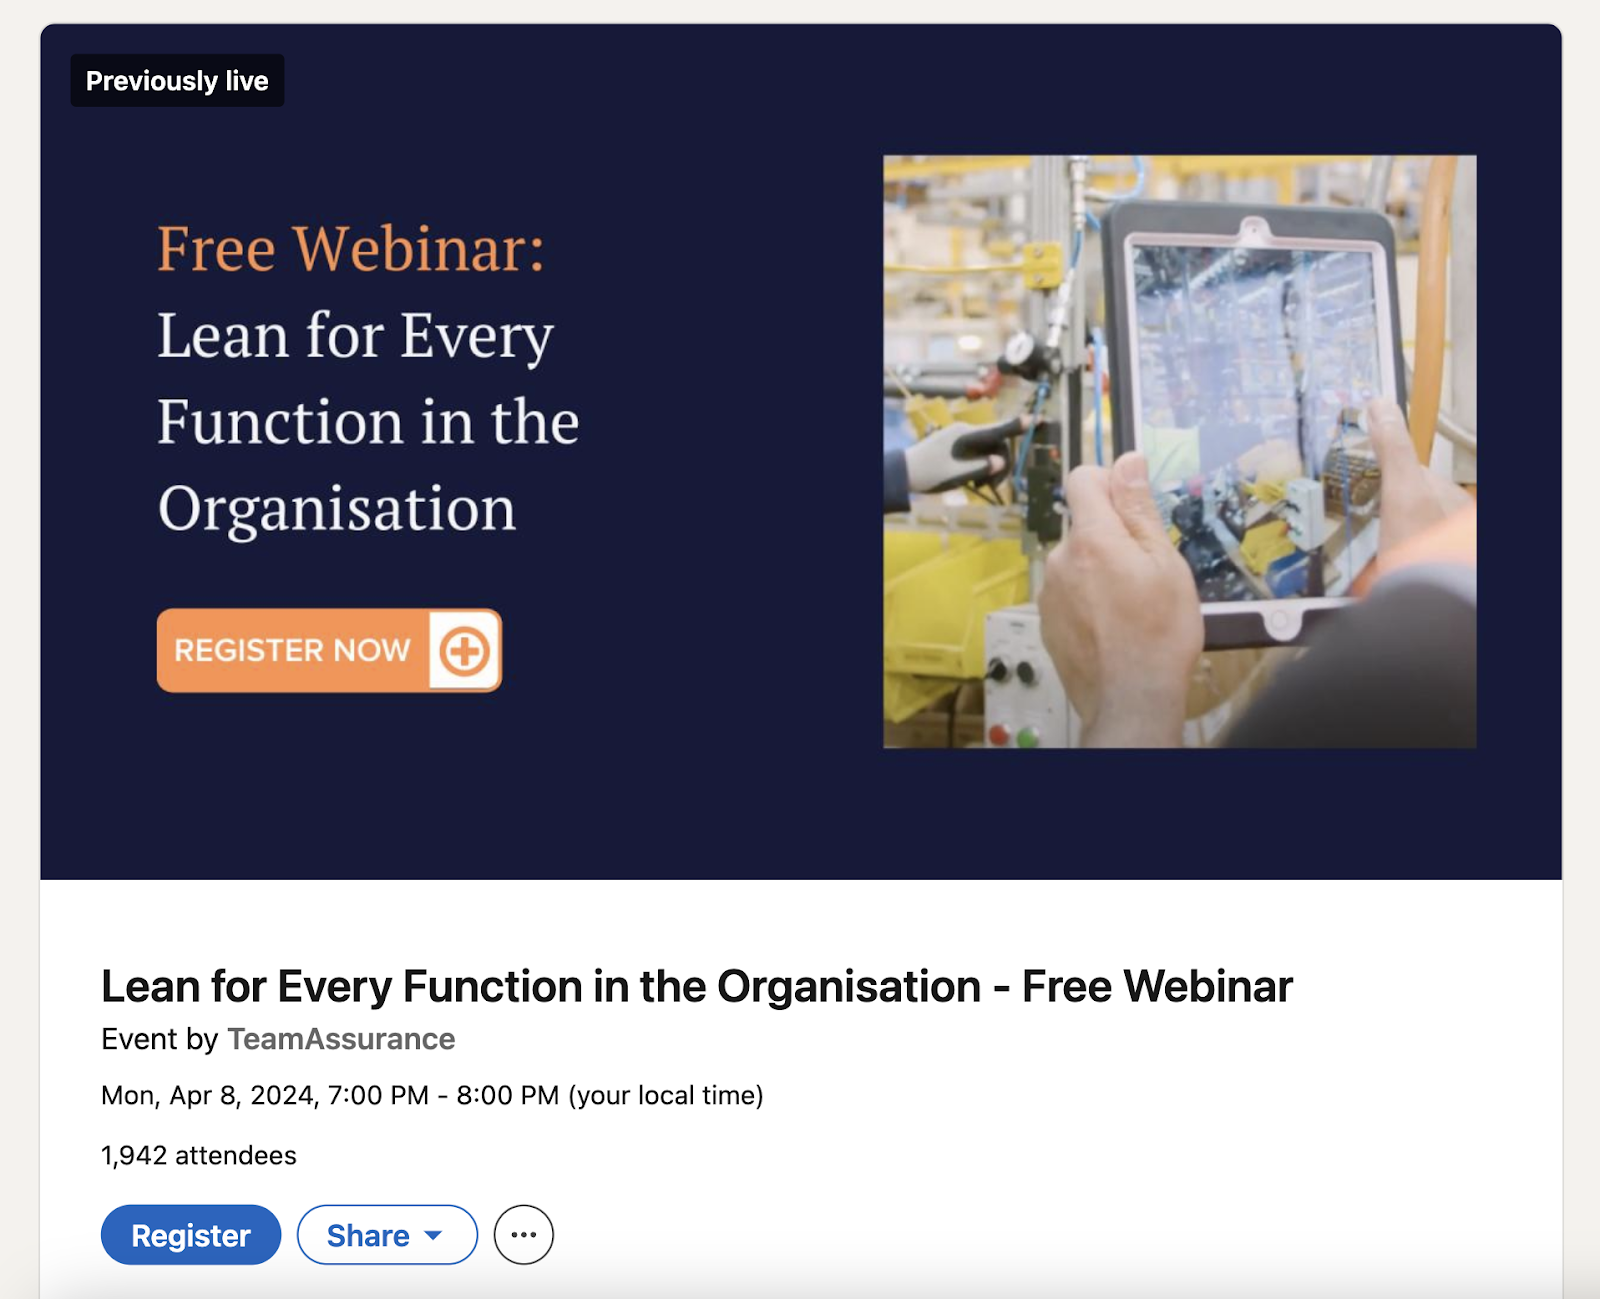 TeamAssurance's free webinar on LinkedIn called lean for every function in the organization